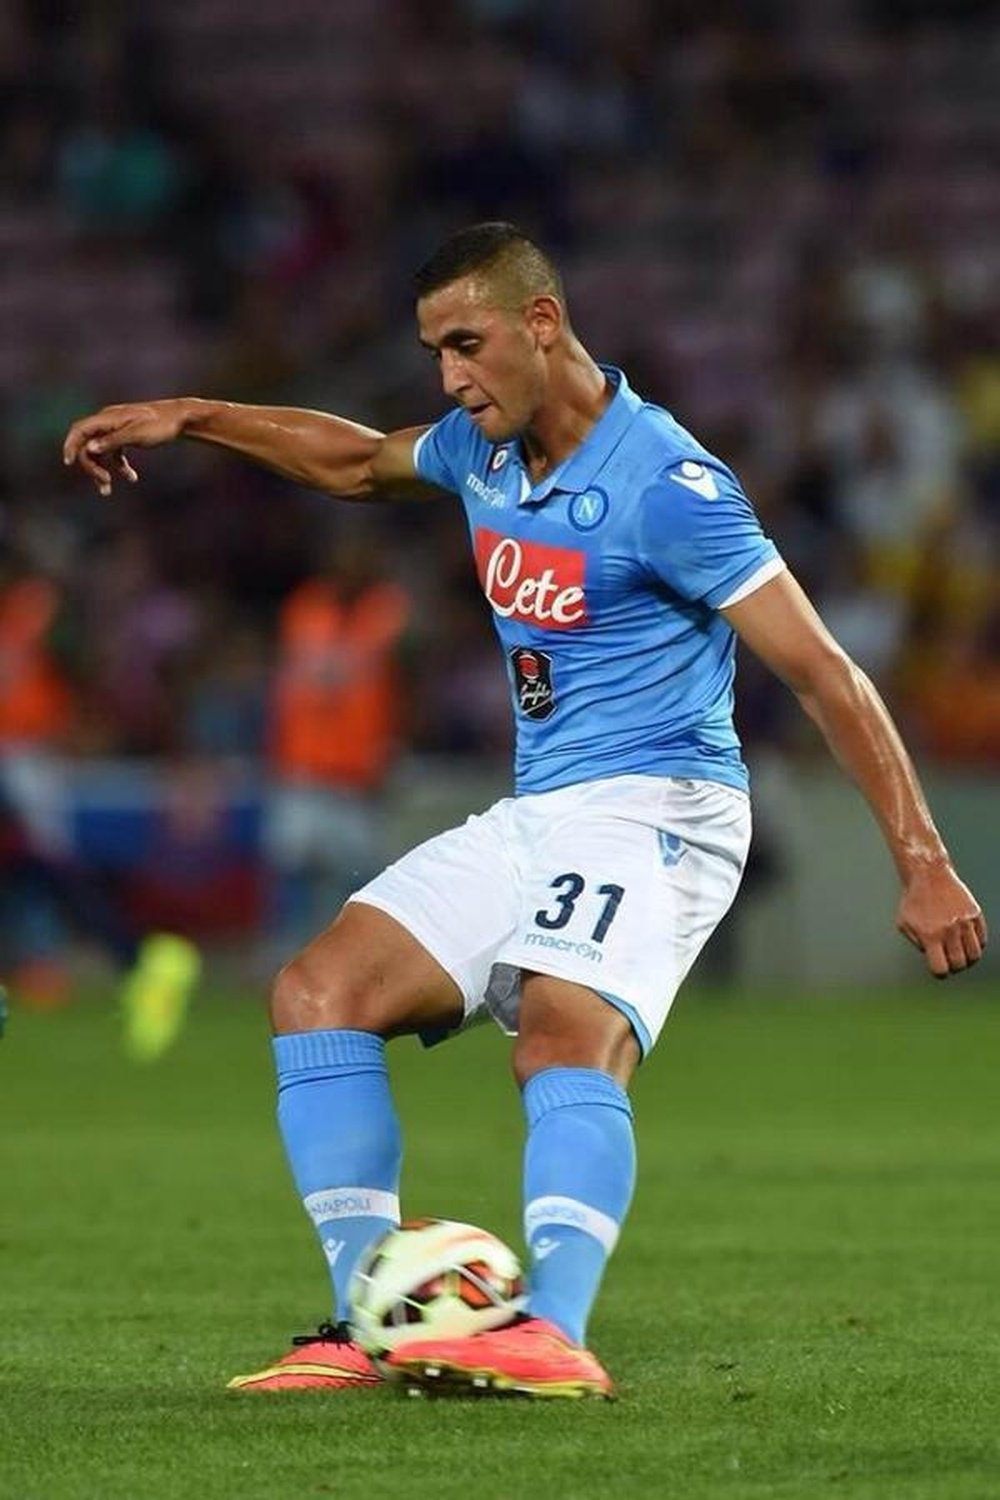 Ghoulam kicking the ball. Goal